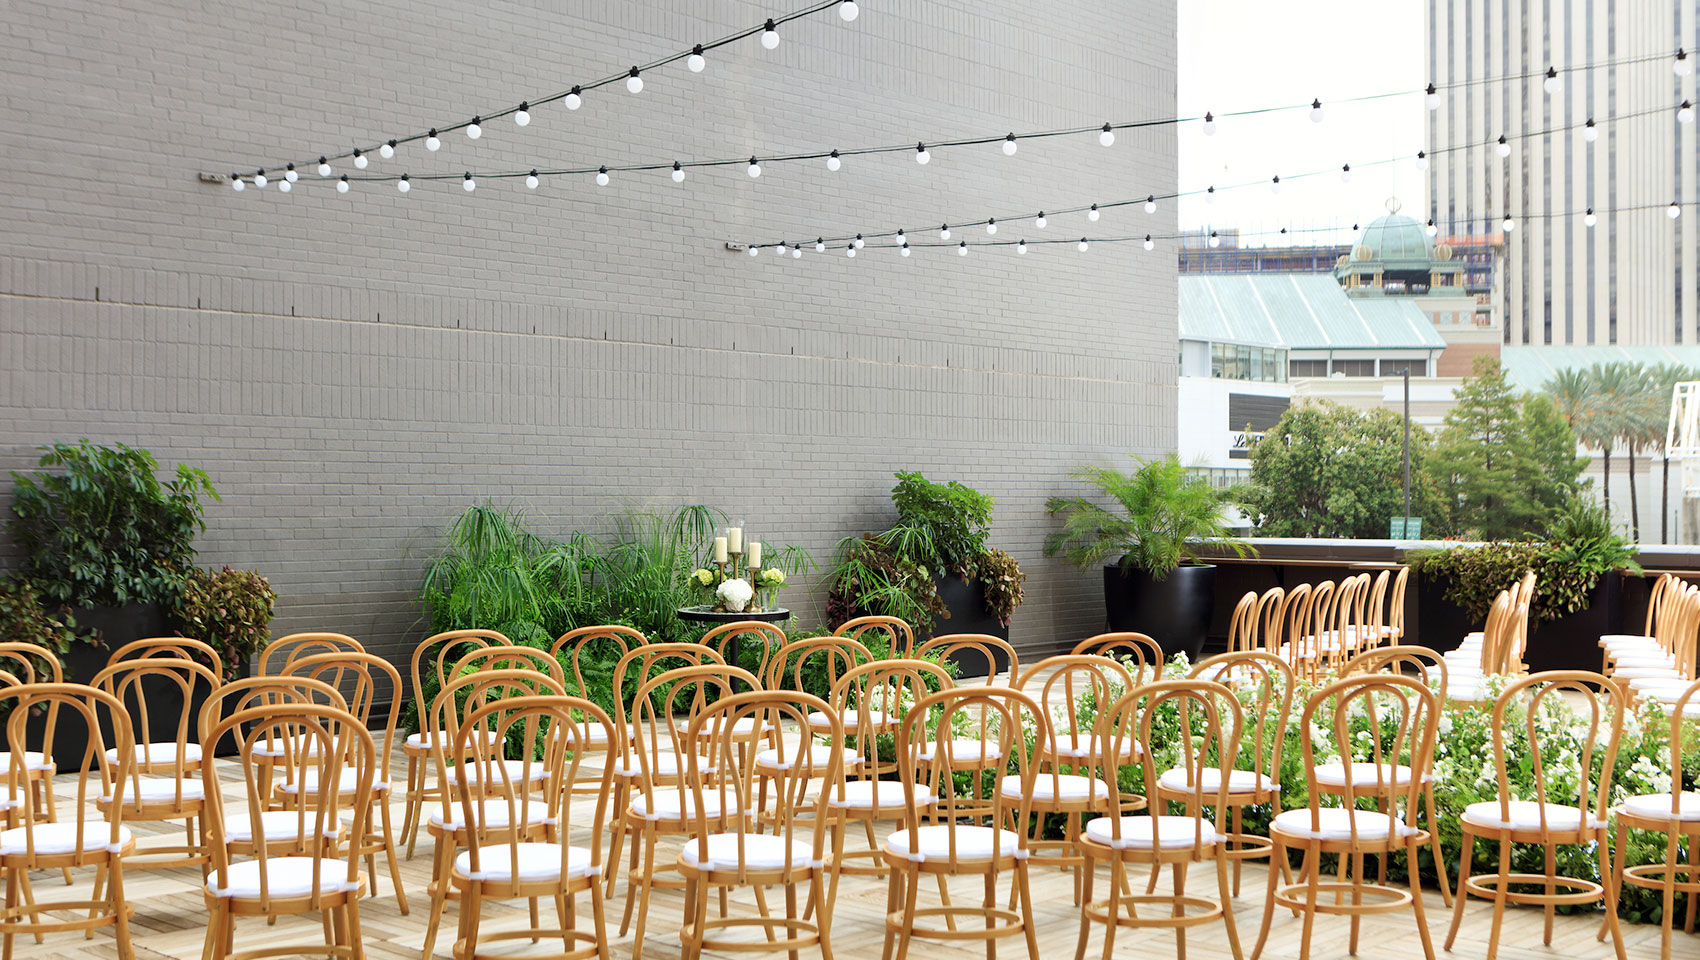 Rooftop wedding ceremony set up with rattan chairs and white florals